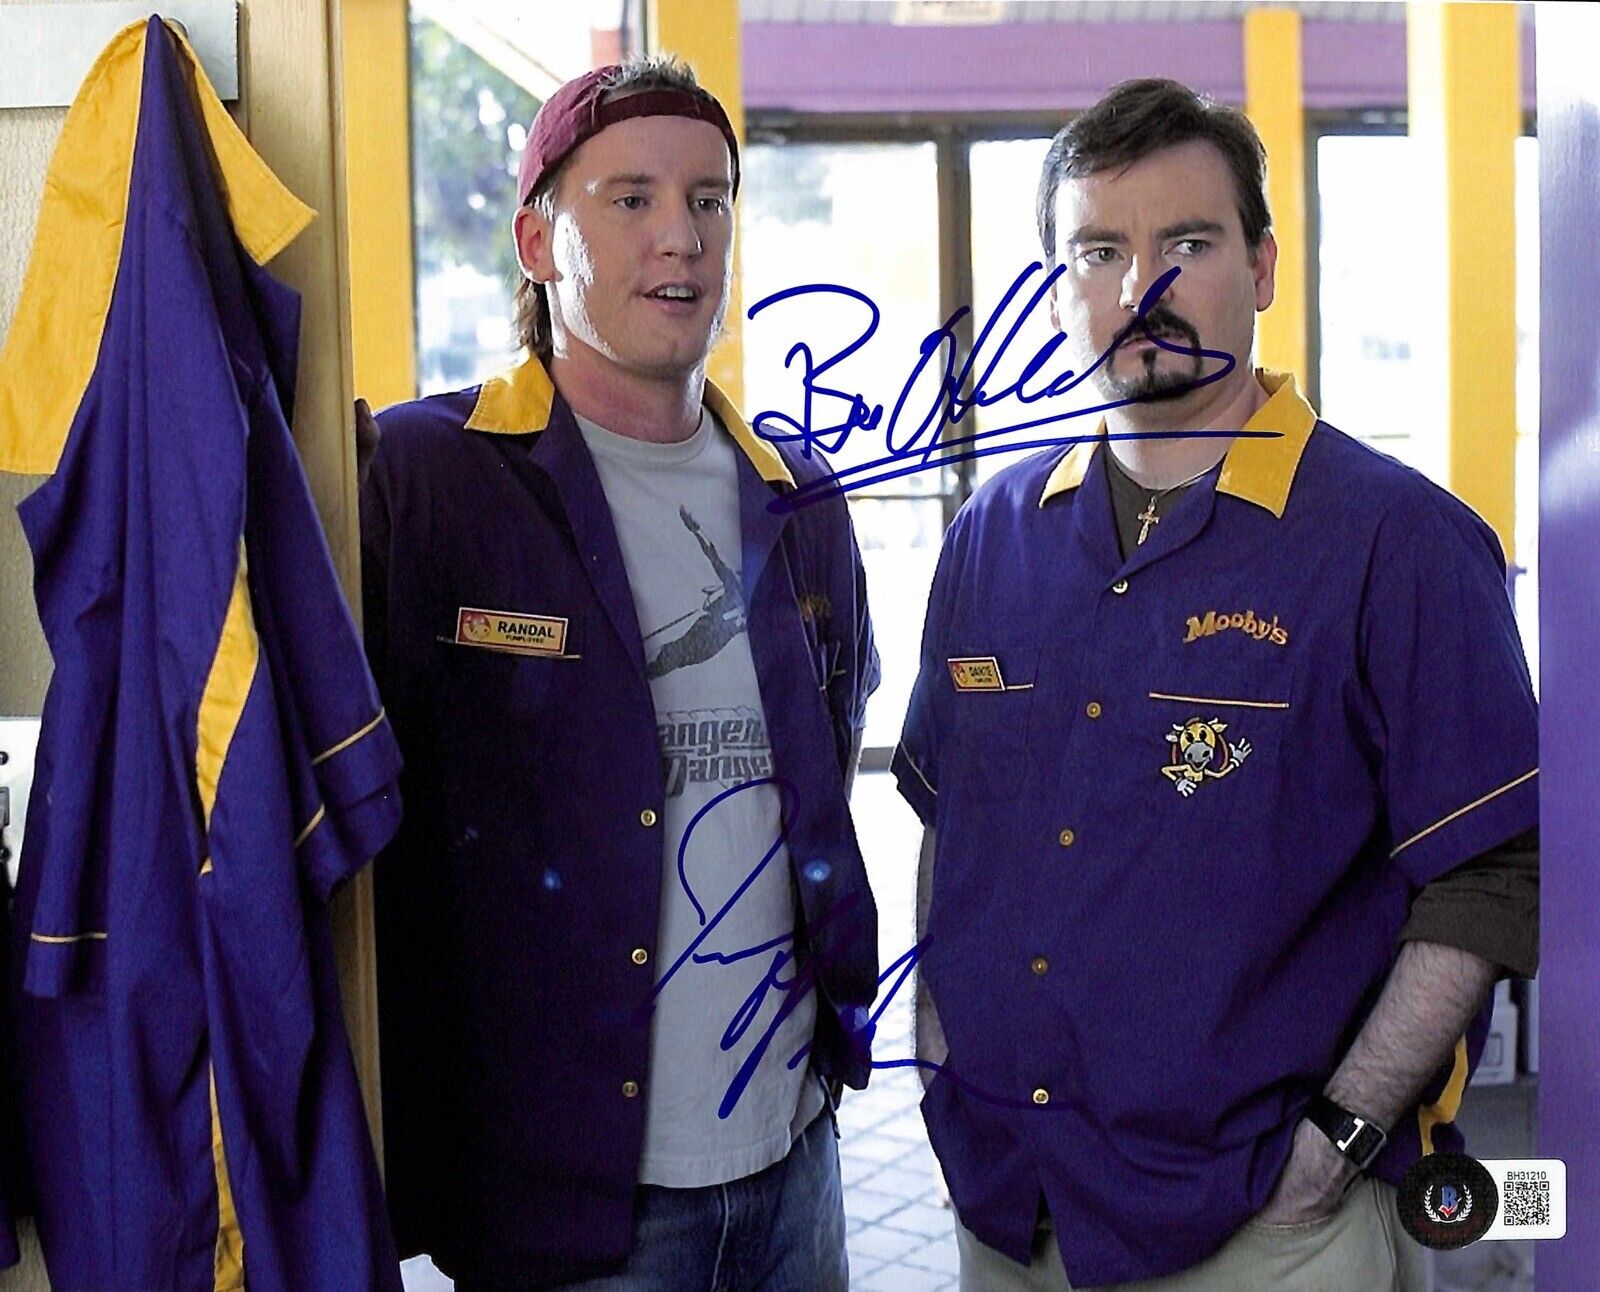 Clerks II Brian O’Halloran and Jeff Anderson Signed 8x10 Photograph BECKETT